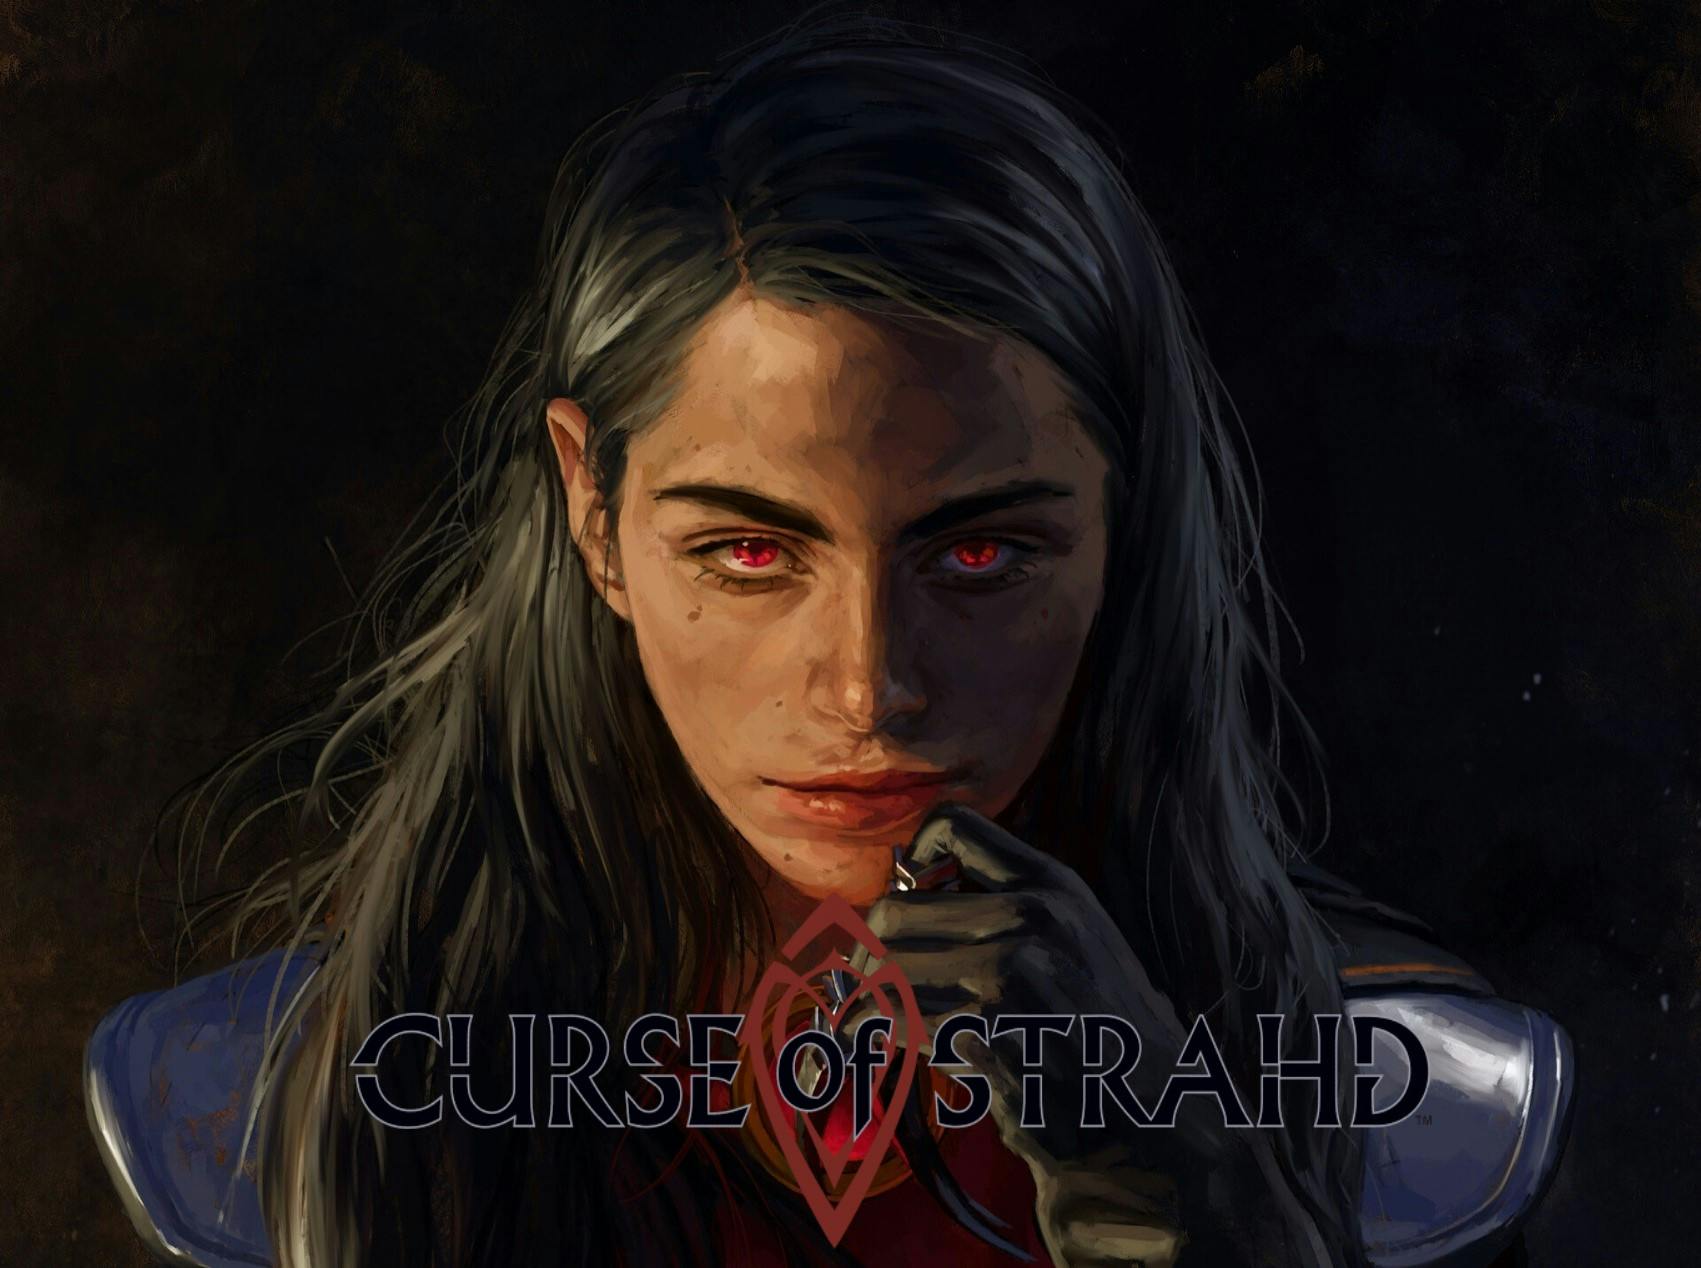 Play Dungeons & Dragons 5e Online, Curse of Strahd — She Is the Ancient, Mondays 7 pm EST